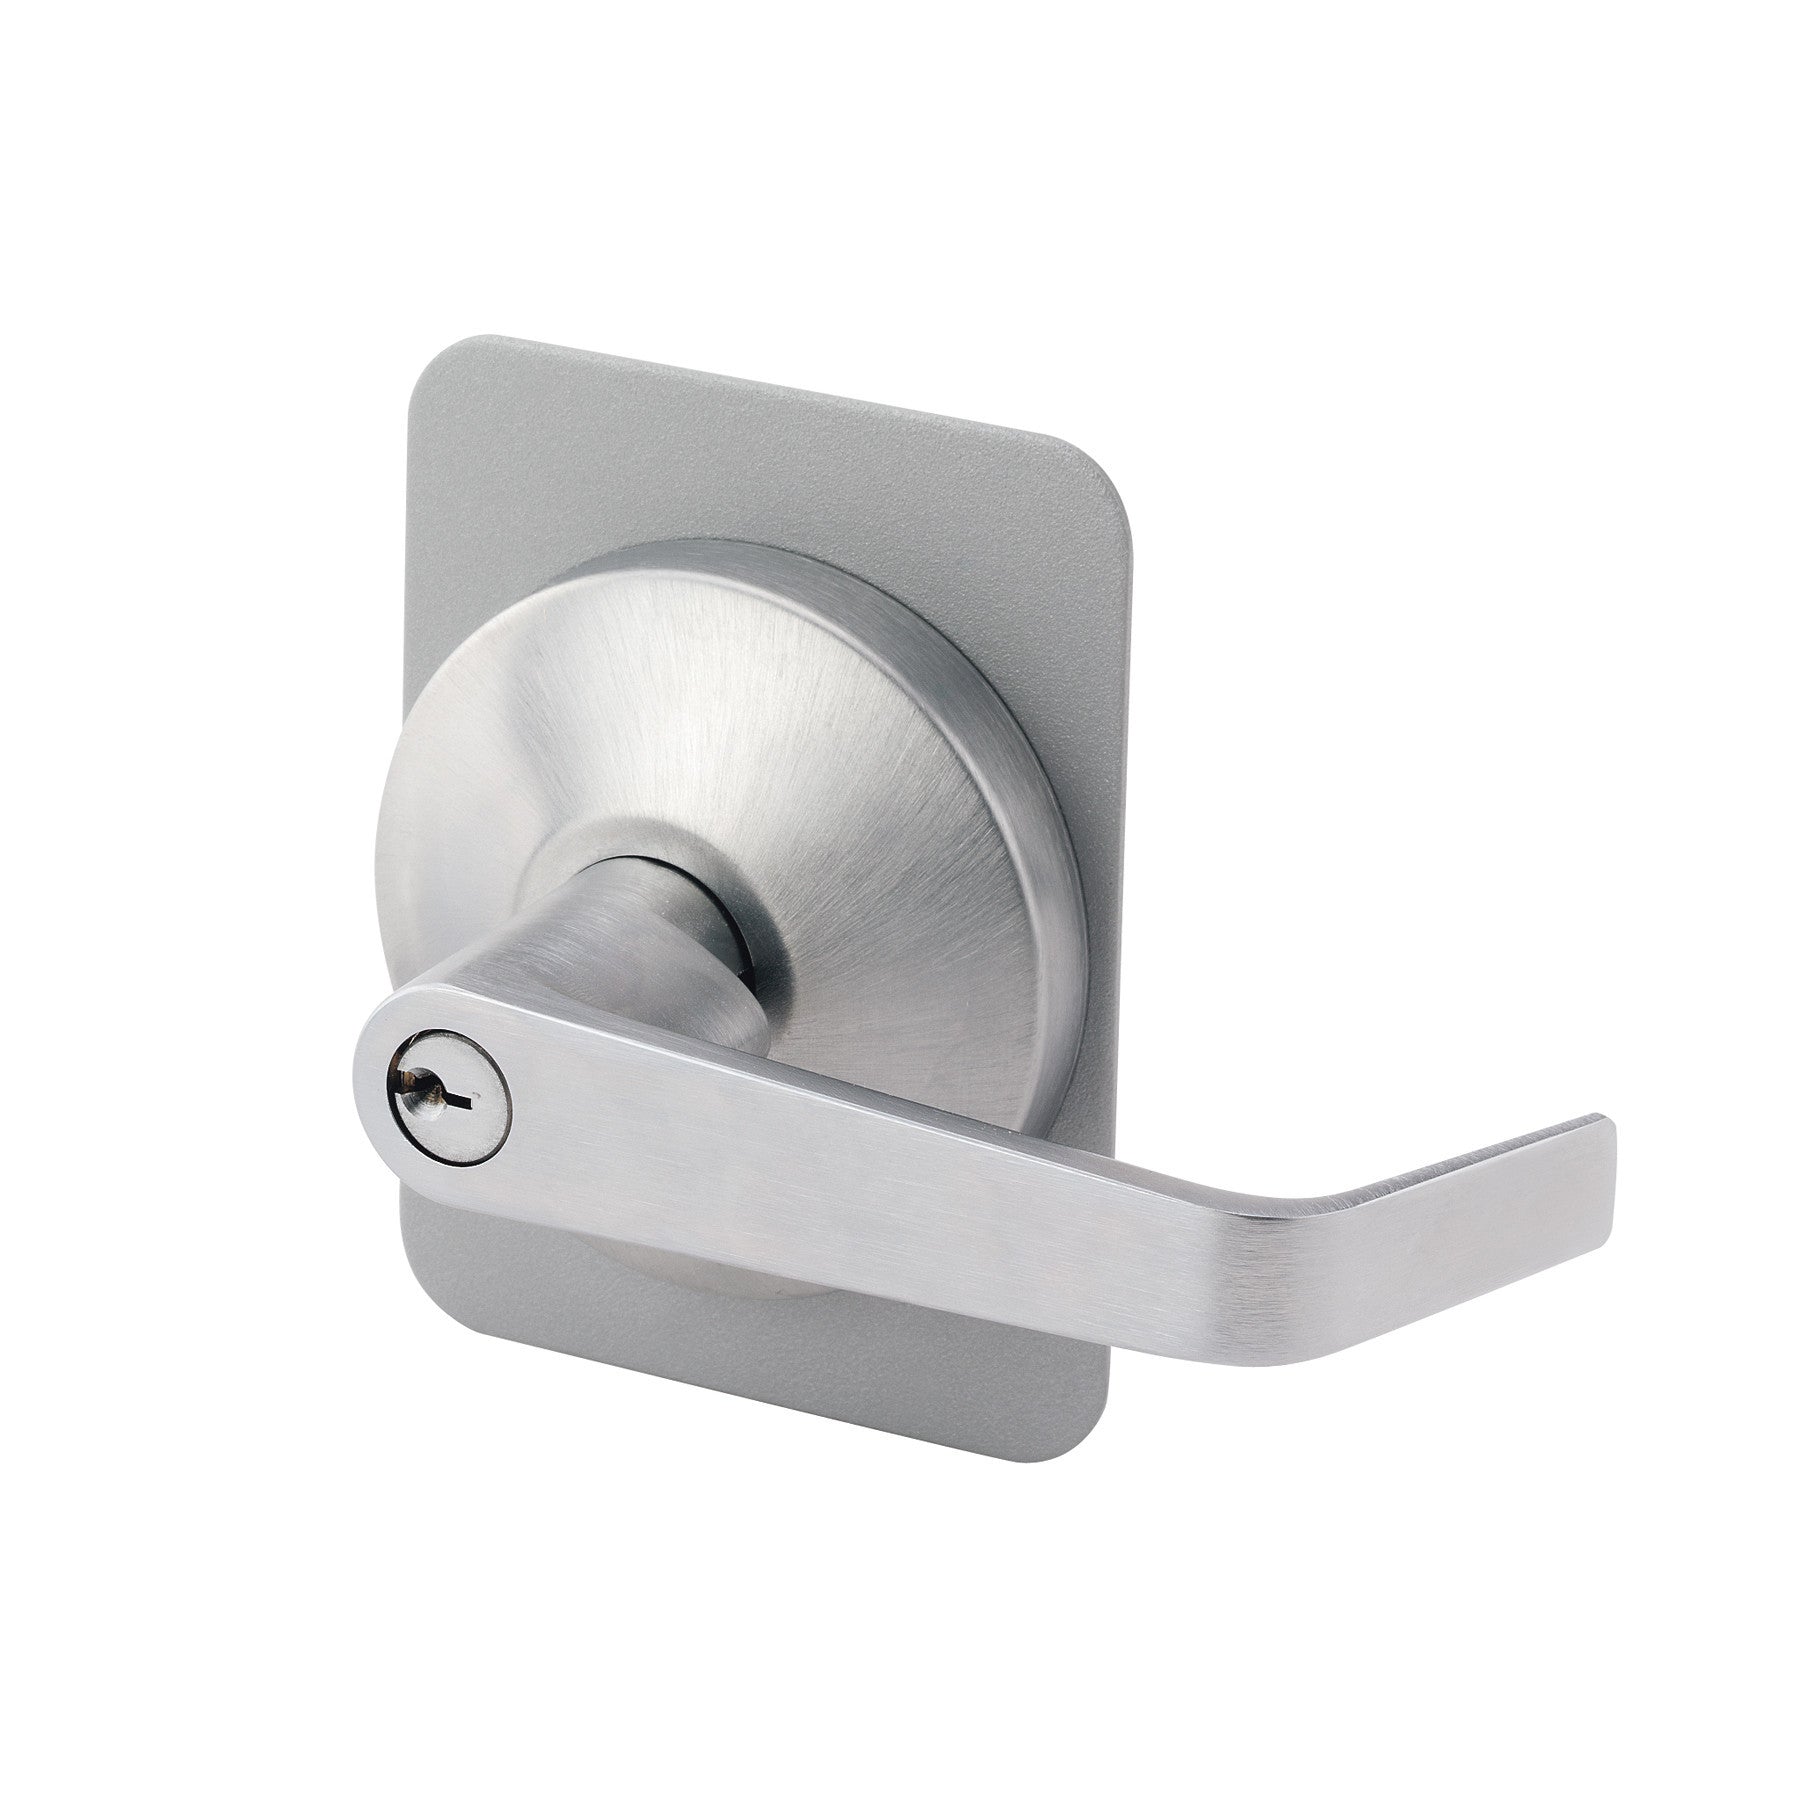 Falcon 914KIL<br>Outside Lever Trim For 19 Series Exit Devices, US32D Finish, Schlage C KeywayExit DevicesFalcon - Door Resources